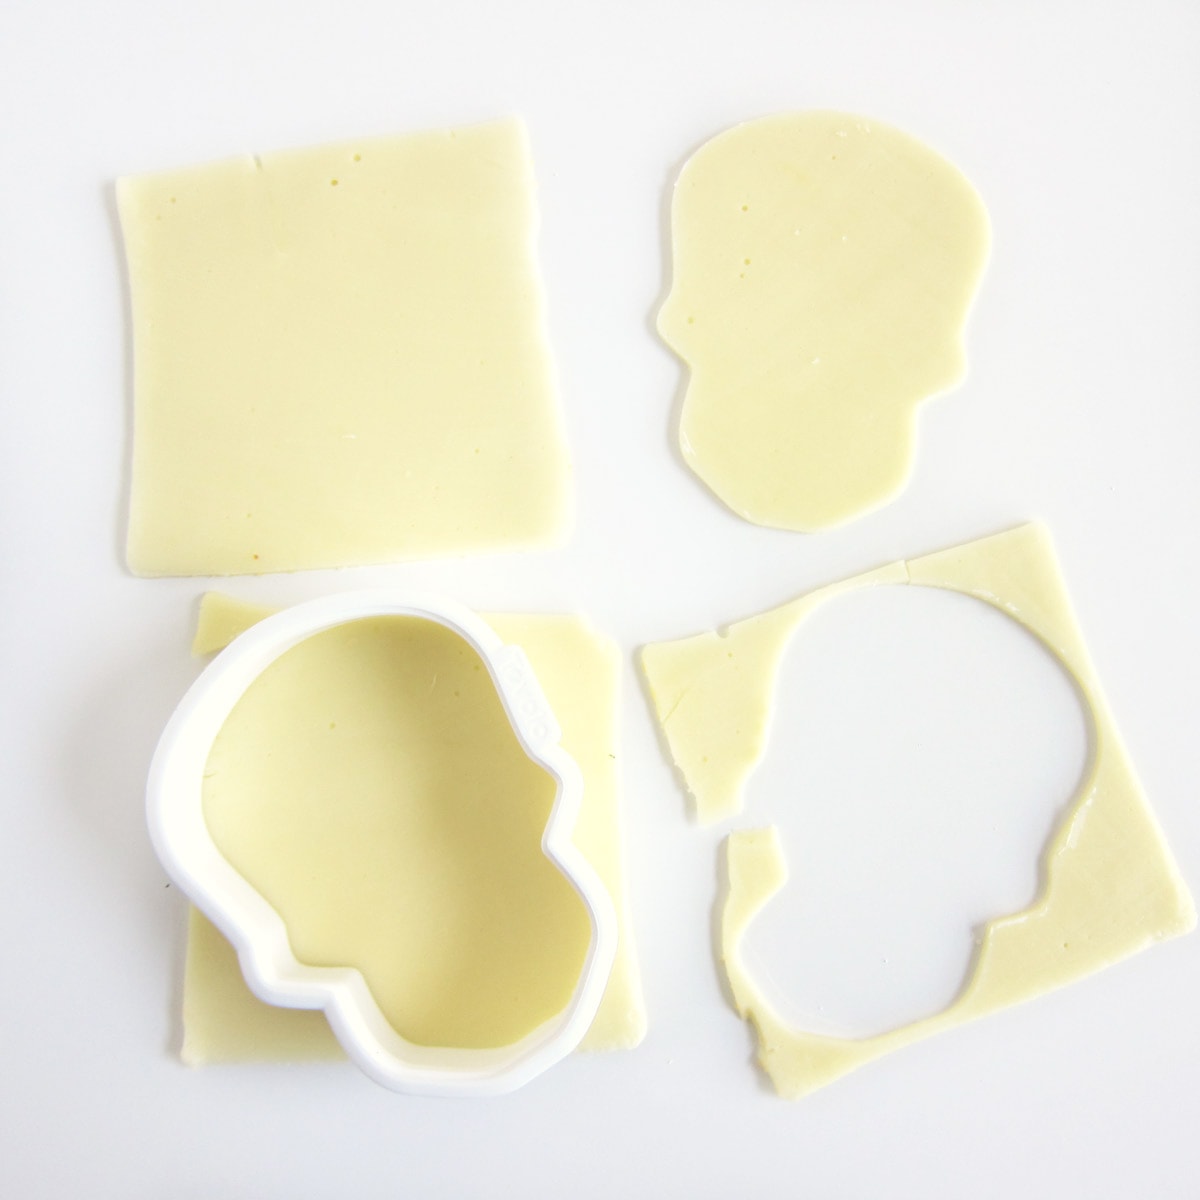 cutting white cheese slices using a skull-shaped cookie cutter. 